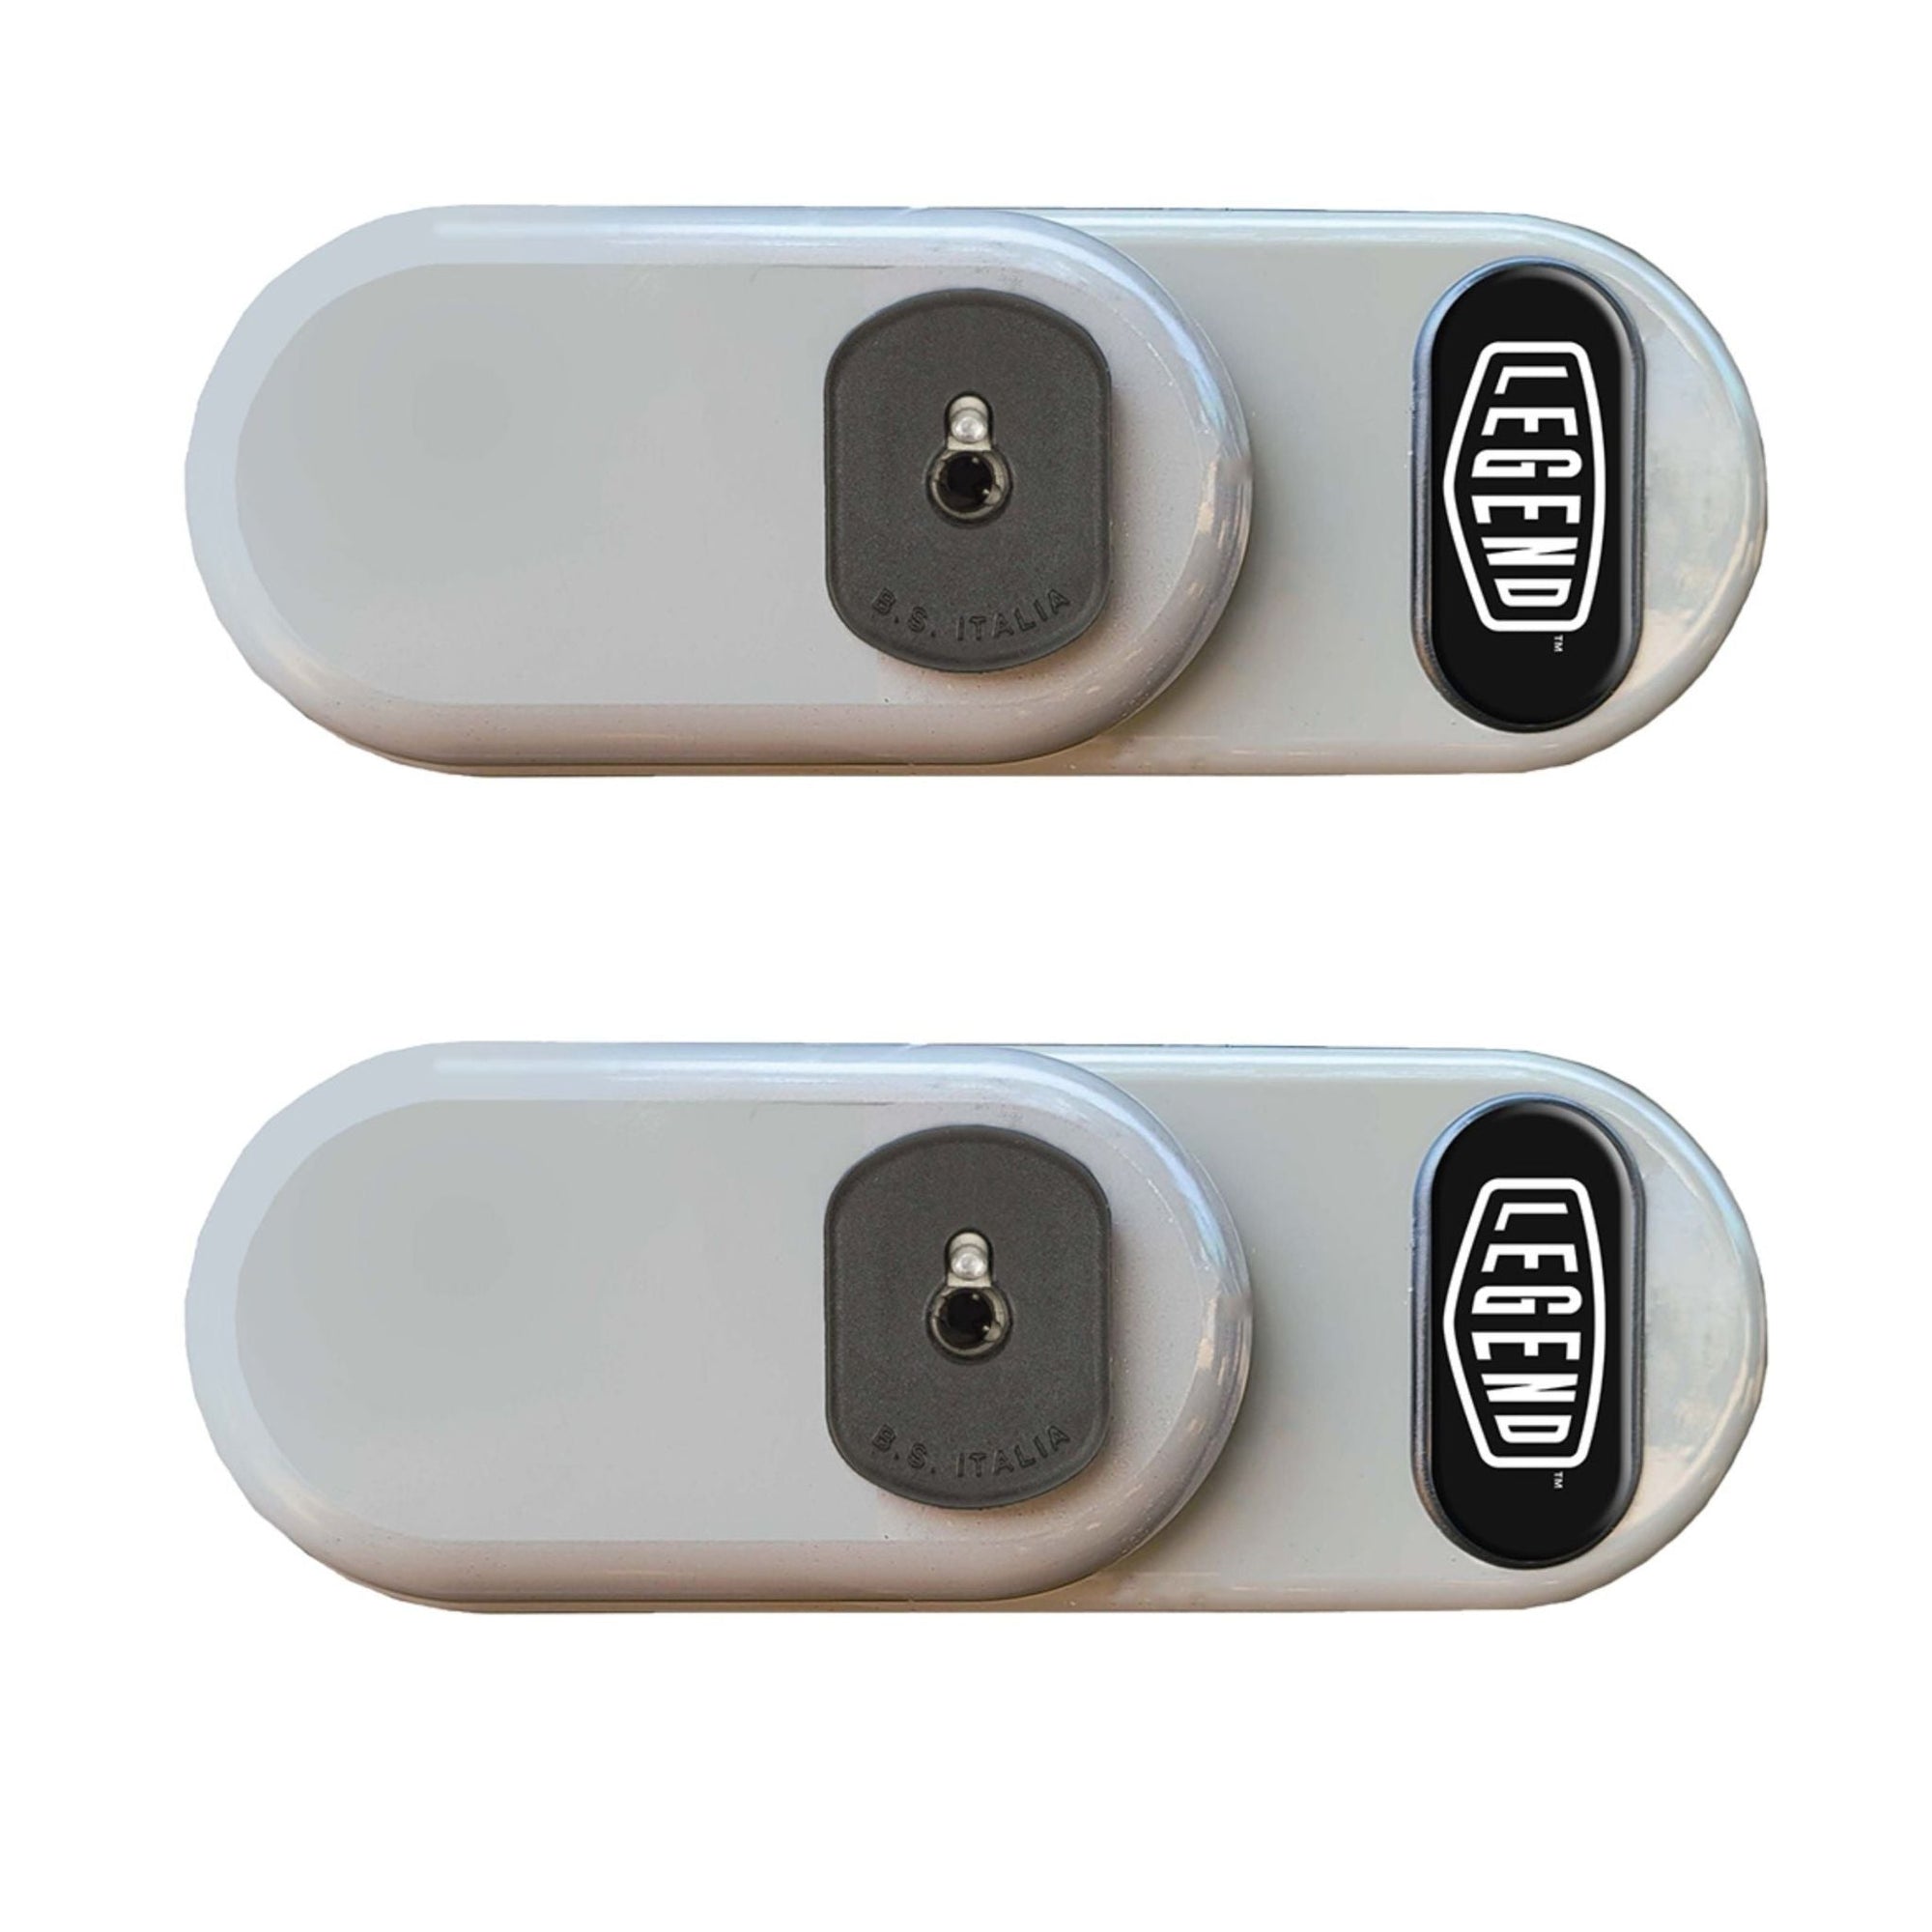 The New Securi-Lock SL1-021-002 Double Padlock Is a High Security Vehicle Door Lock That Affixes to the Rear and Side of Van Doors for Complete Protection and Safety Against Cargo Theft - The Lock Source